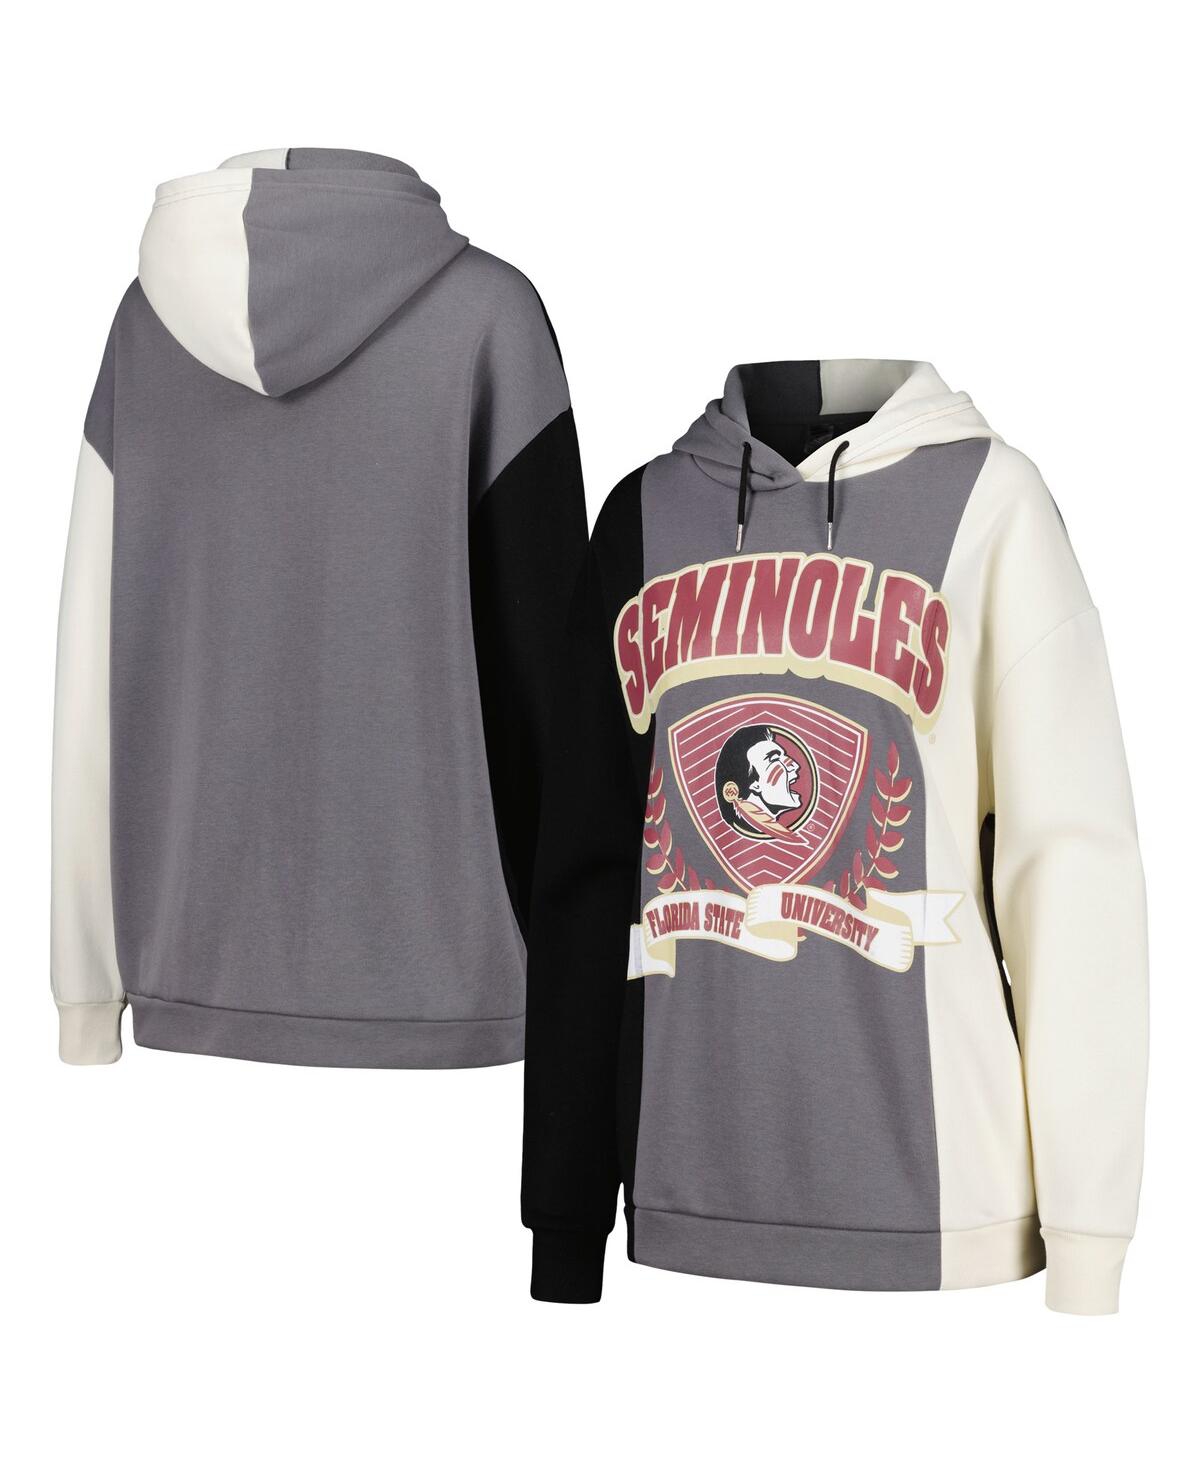 GAMEDAY COUTURE WOMEN'S GAMEDAY COUTURE BLACK FLORIDA STATE SEMINOLES HALL OF FAME COLORBLOCK PULLOVER HOODIE